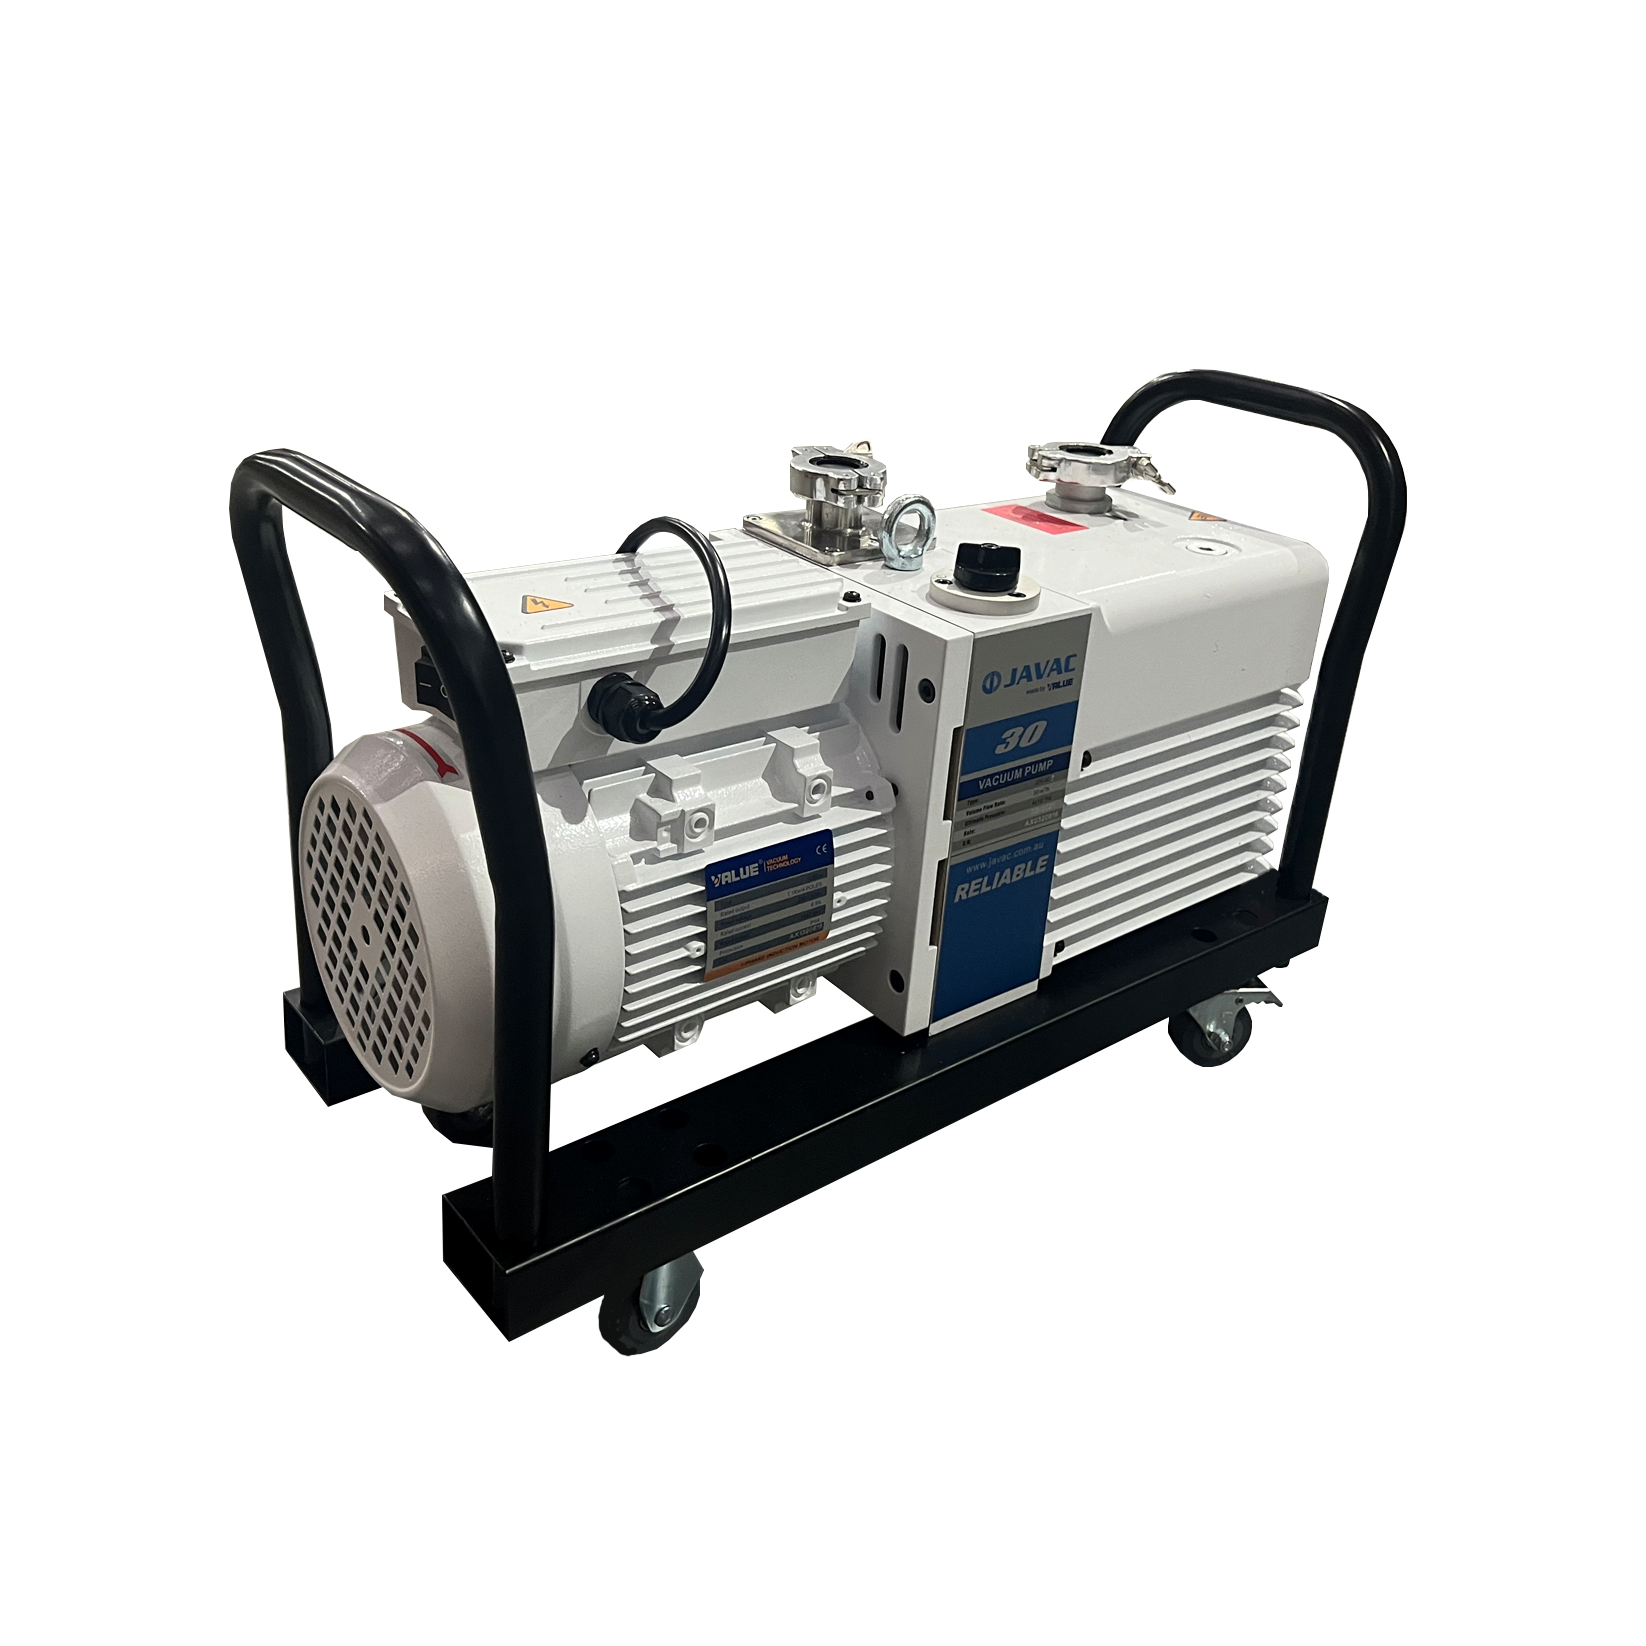 VACUUM PUMP—Dual Stage, 30 m3/h - WITH TROLLEY